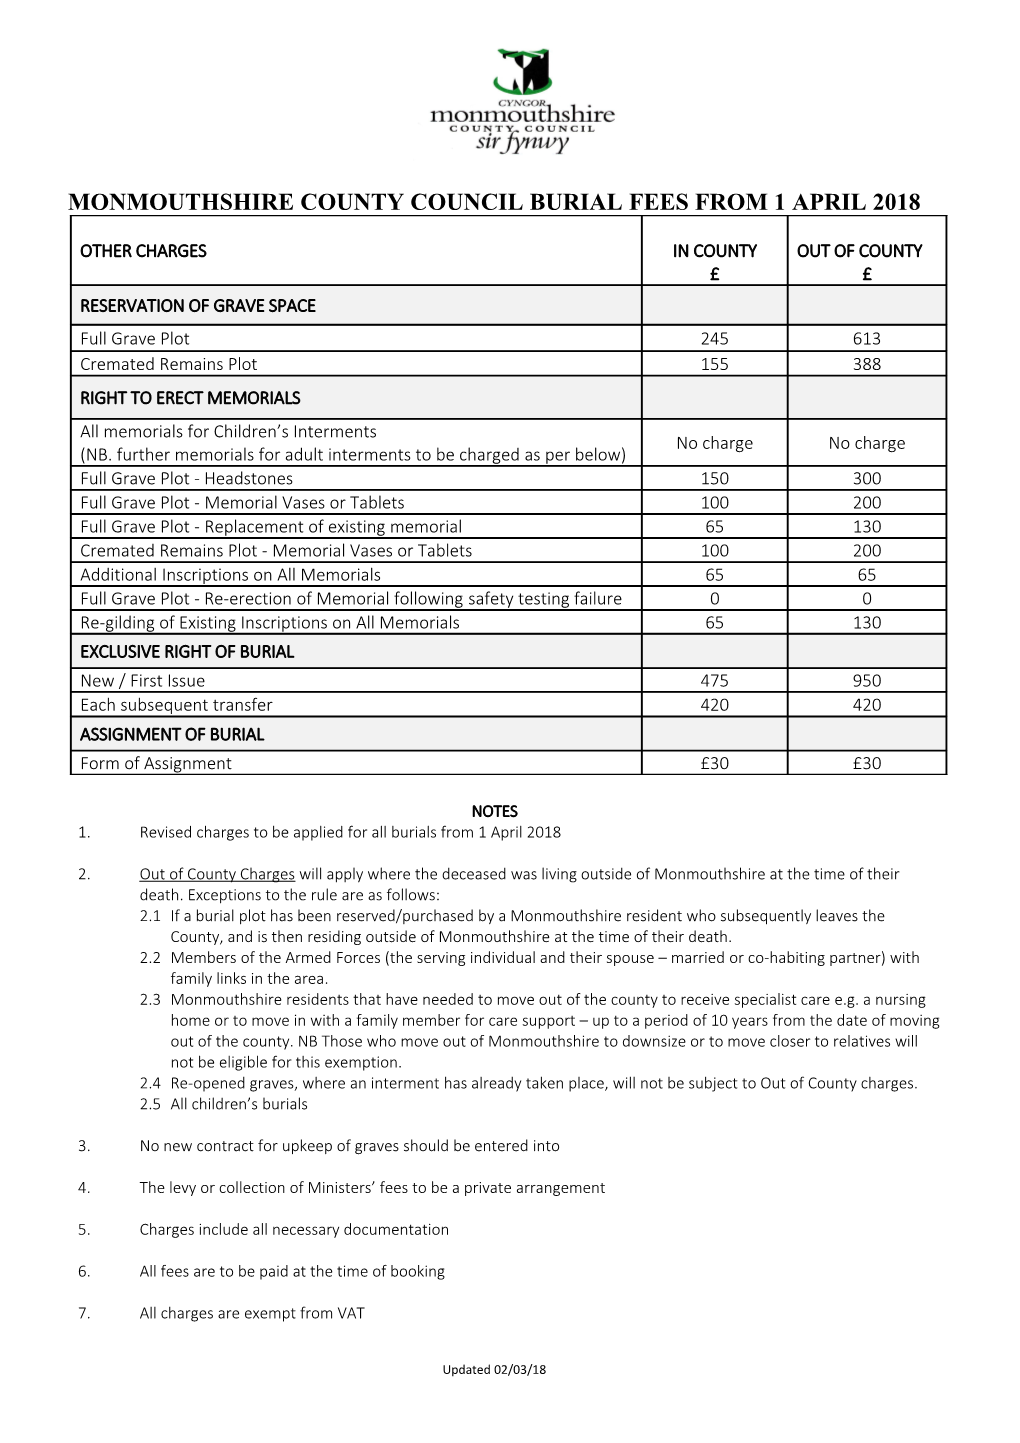 Monmouthshire County Council Burial Fees from 1 April 2008